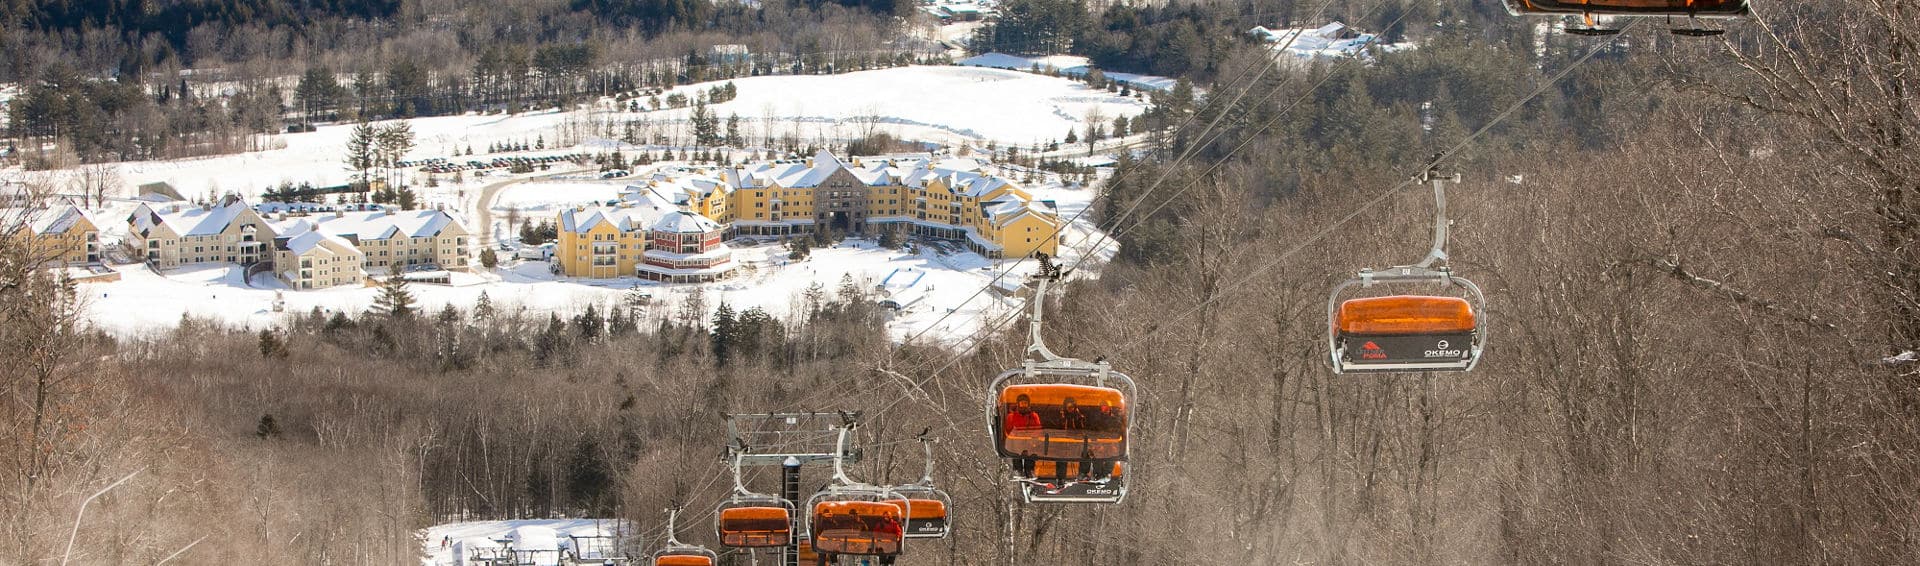 Okemo Mountain Resort - Winter Aerial View with Chairlift